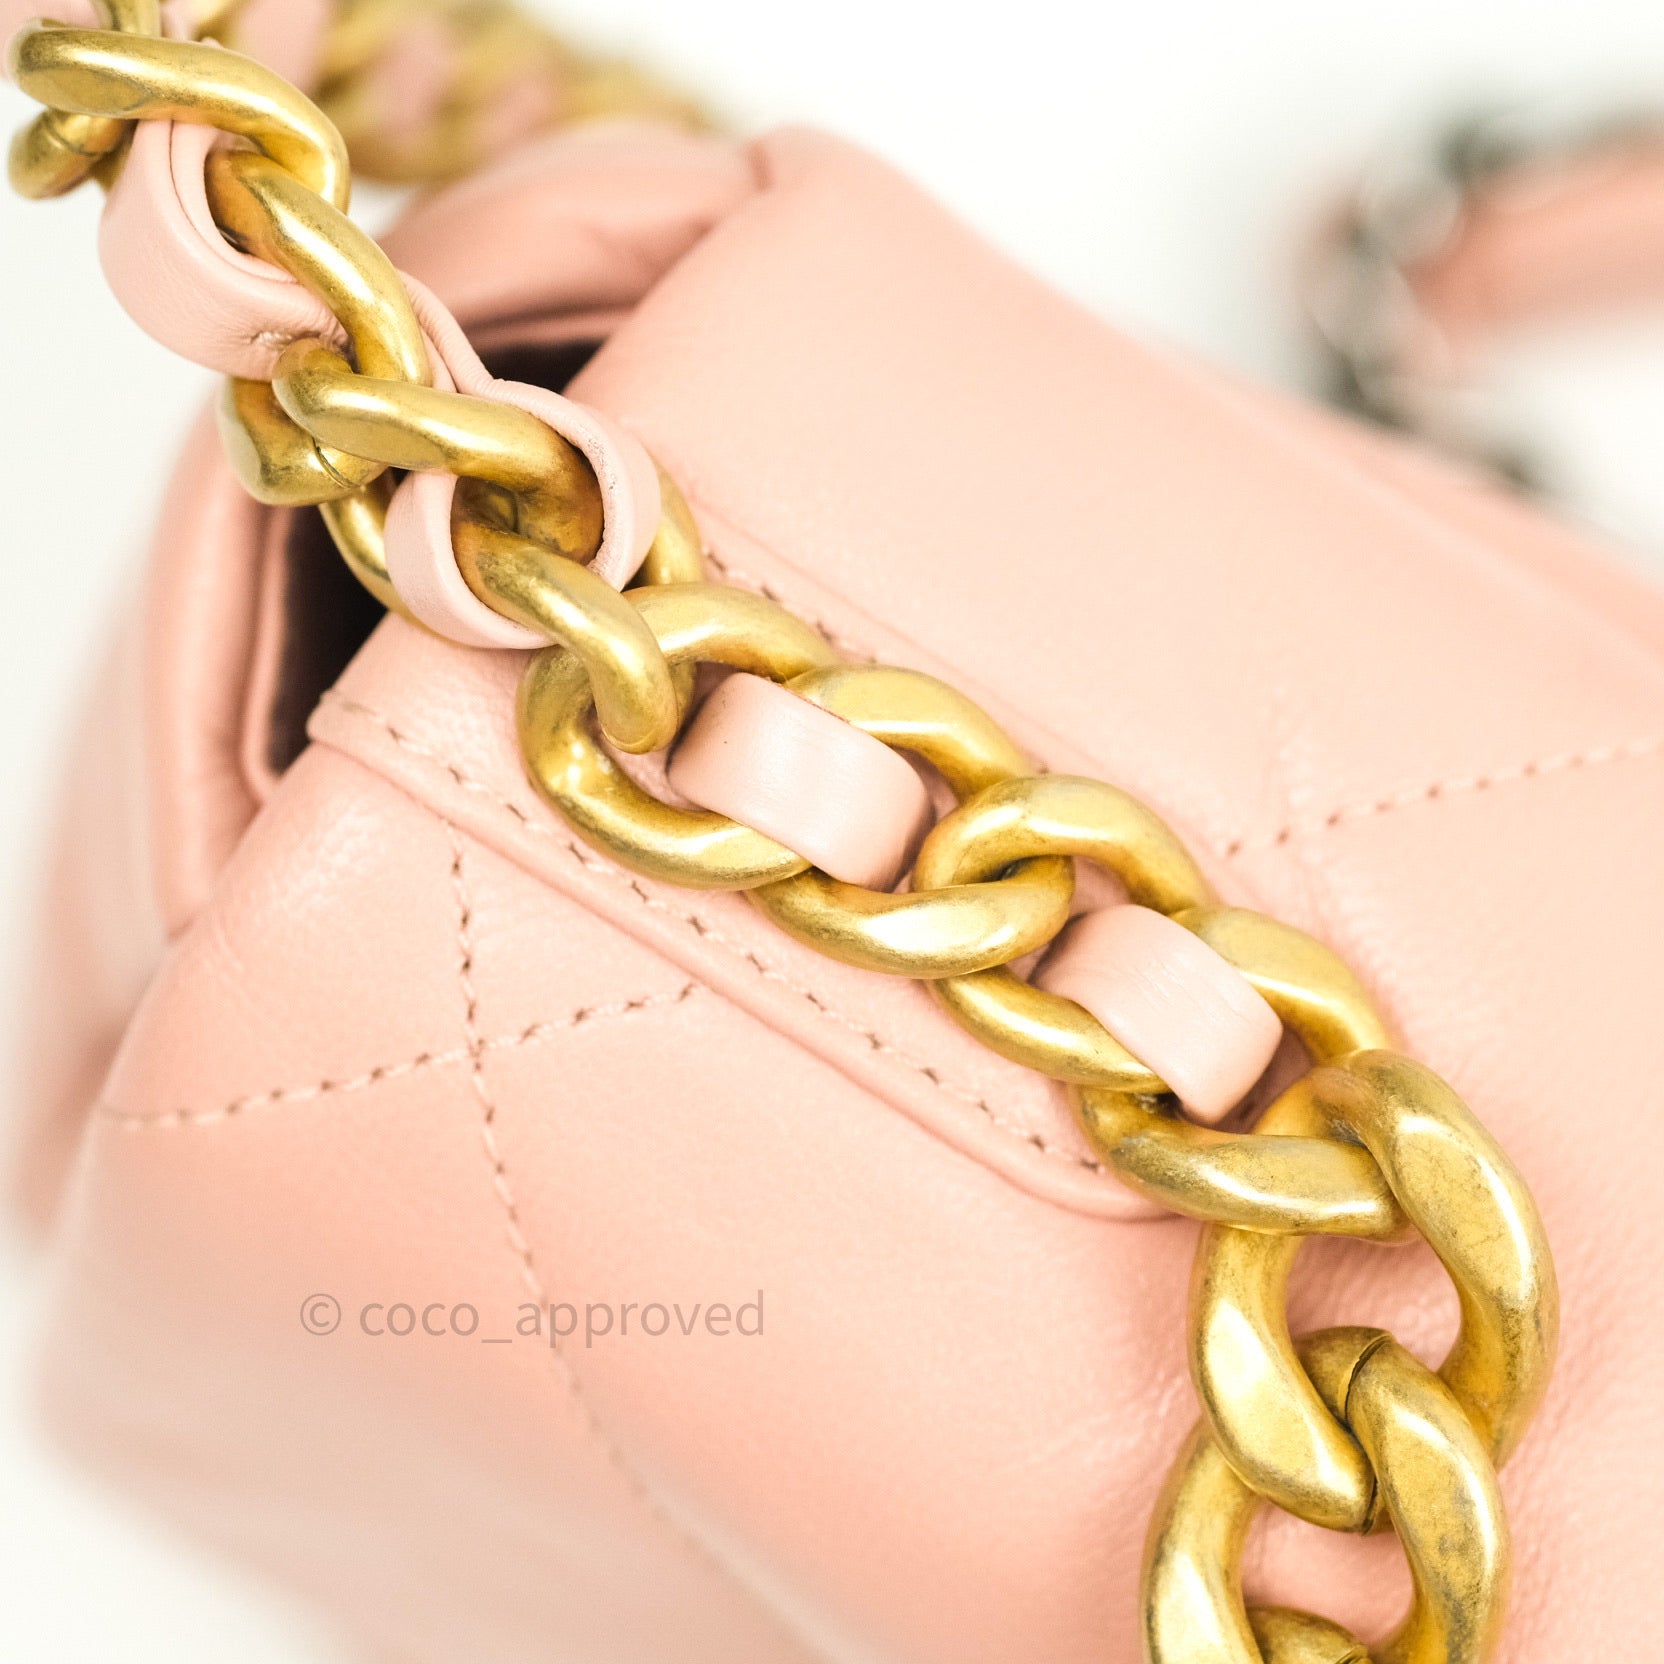 Chanel 19 Small Tweed Pink Mixed Hardware – Coco Approved Studio